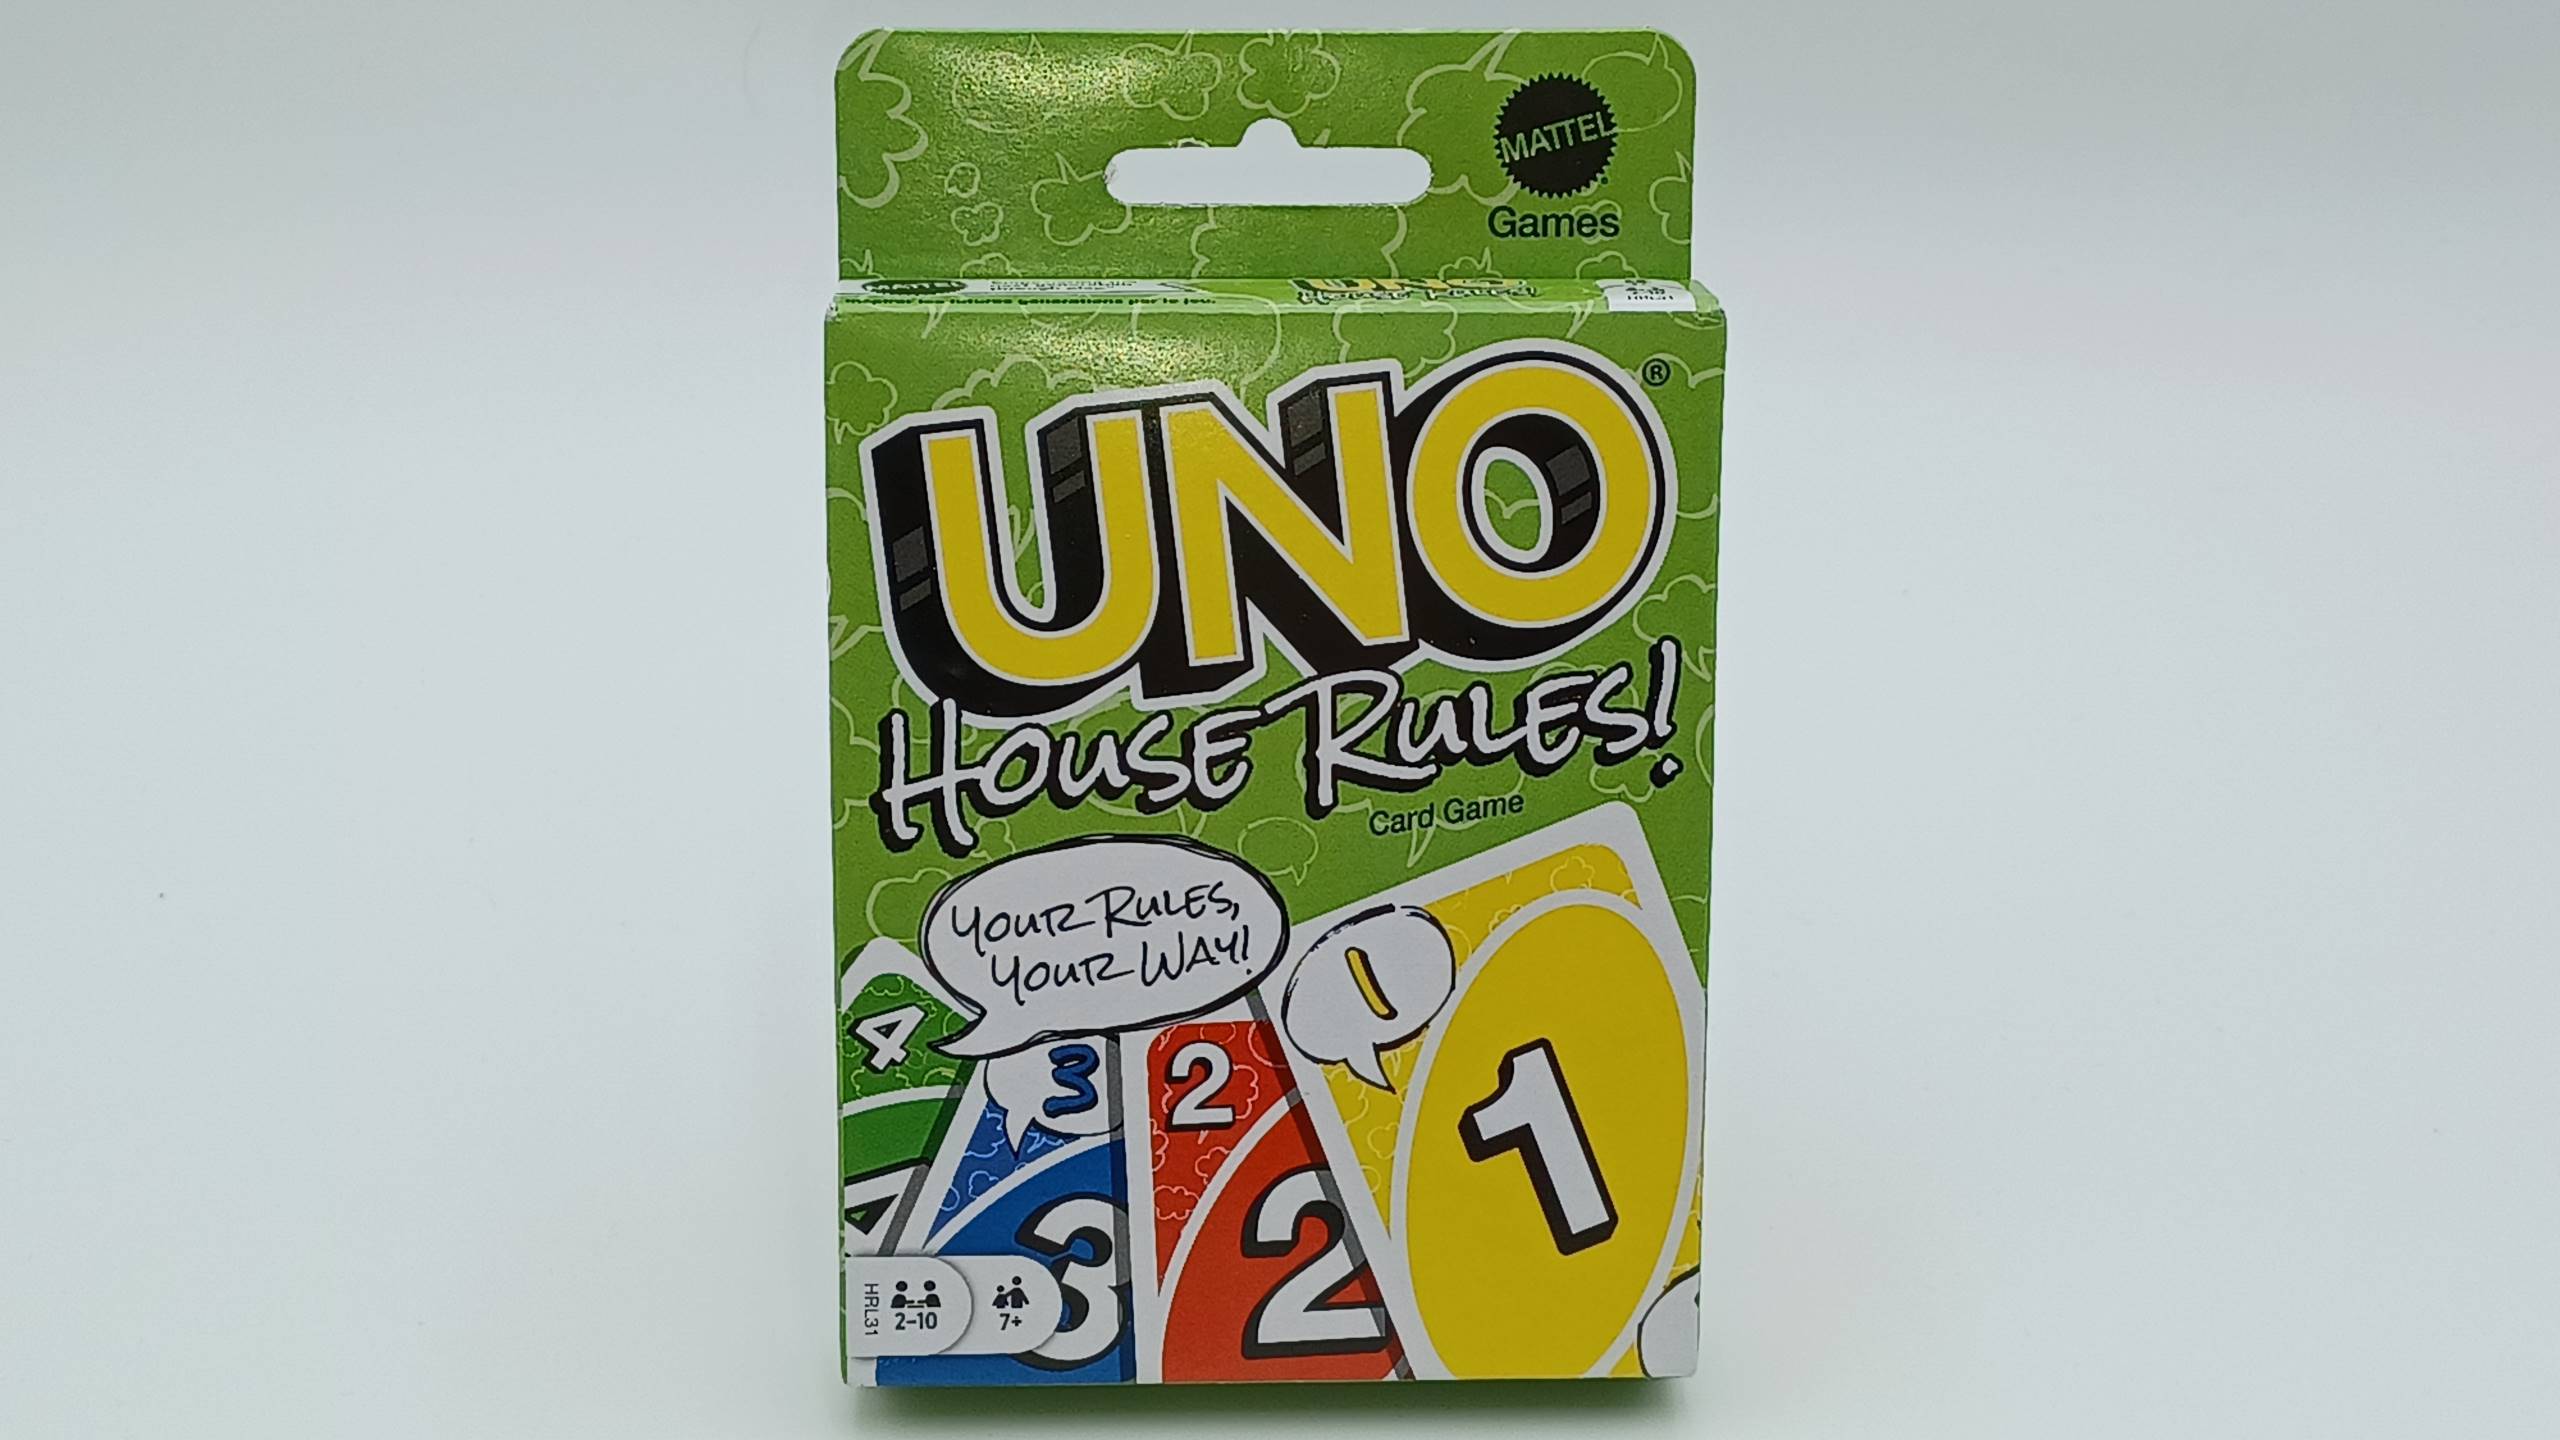 Any suggestions for more house rules to reach 10? : r/unocardgame